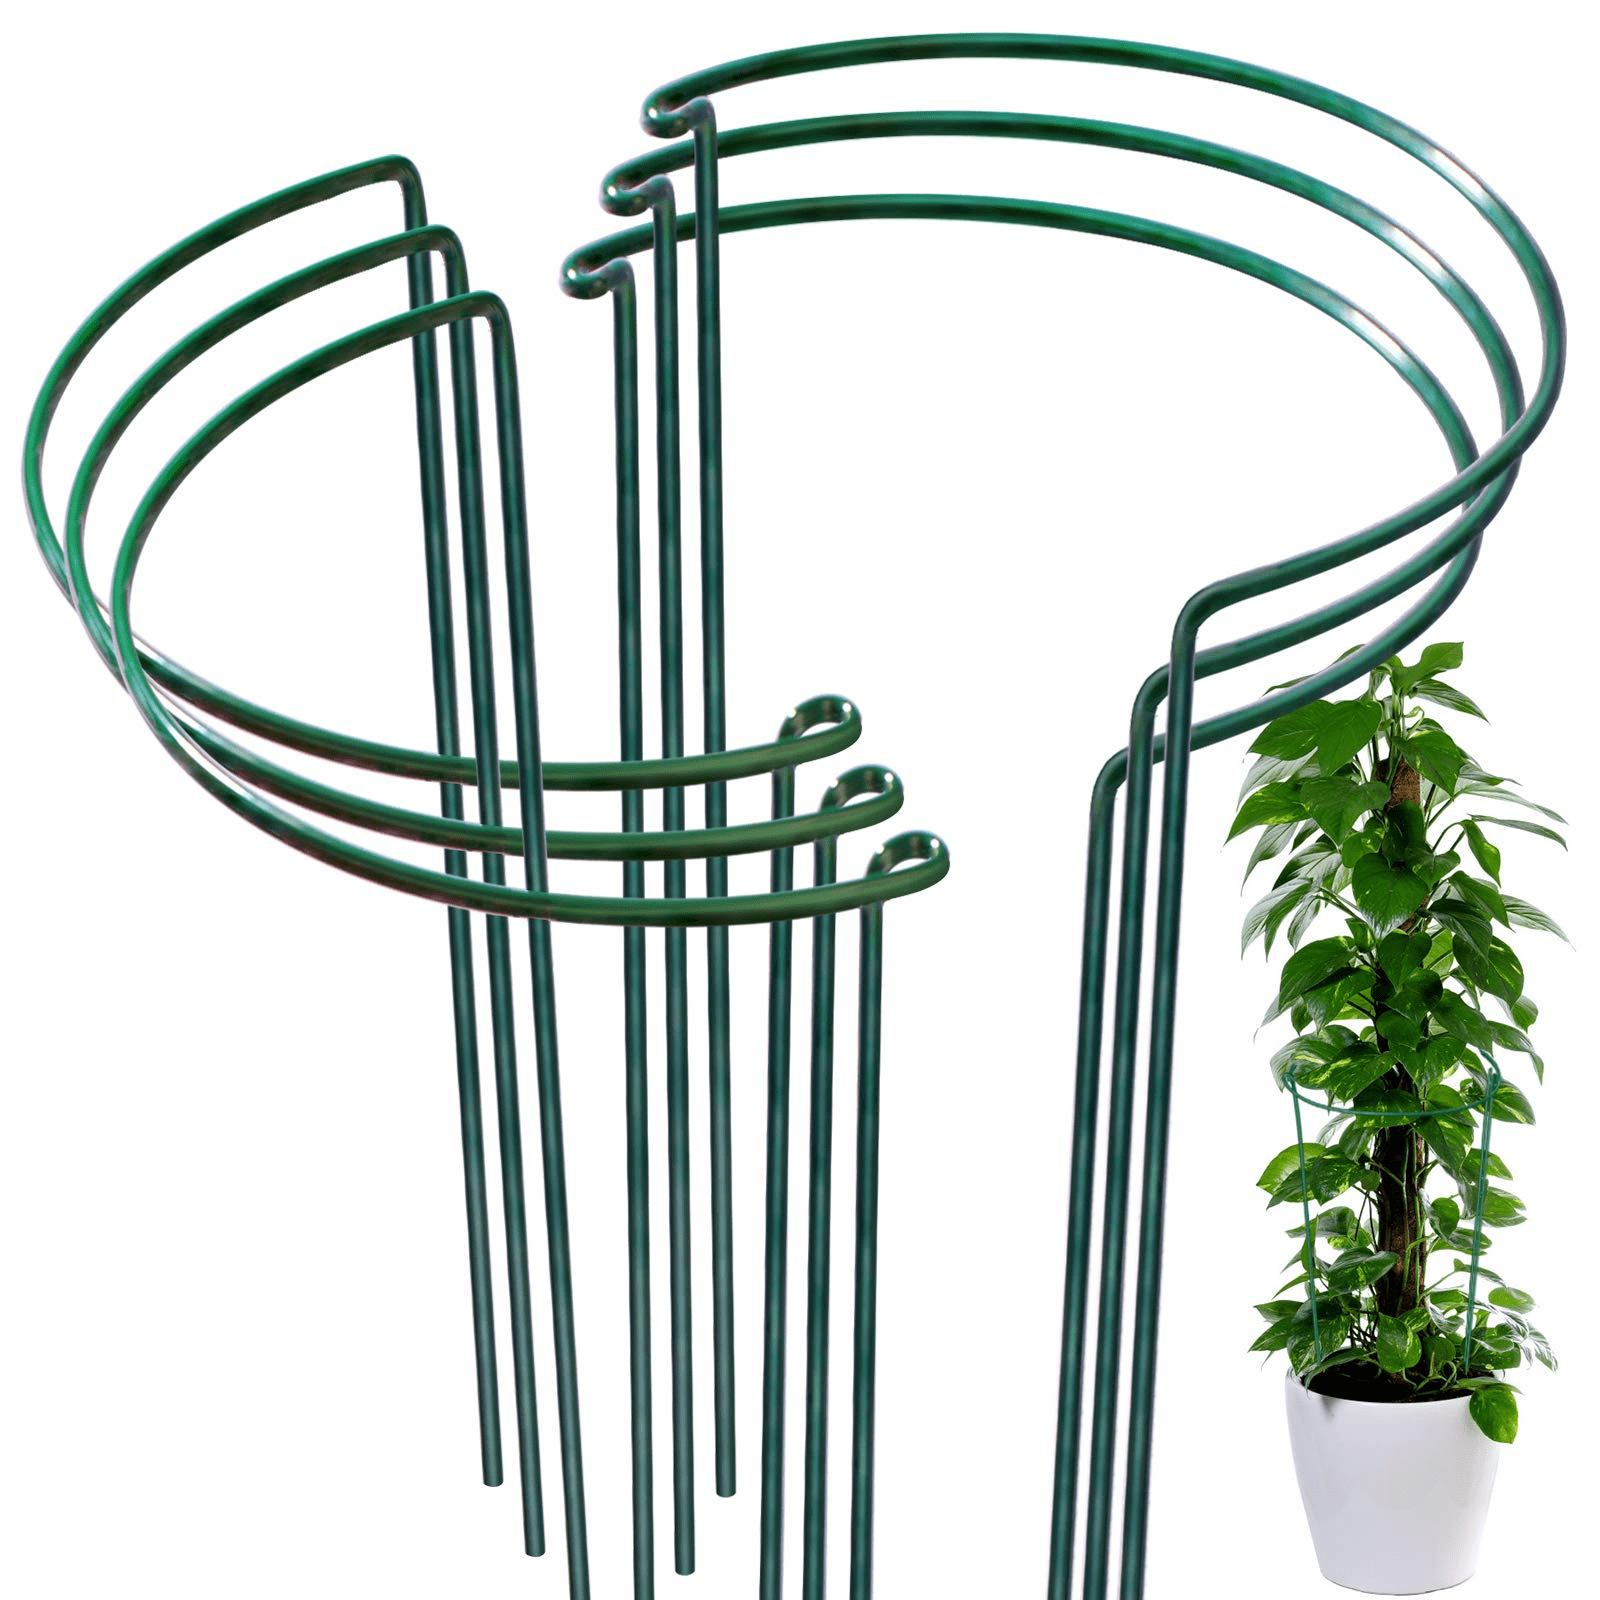 8x Plant Support Stake Metal Garden Plant Stake Green Half Round Support Ring 